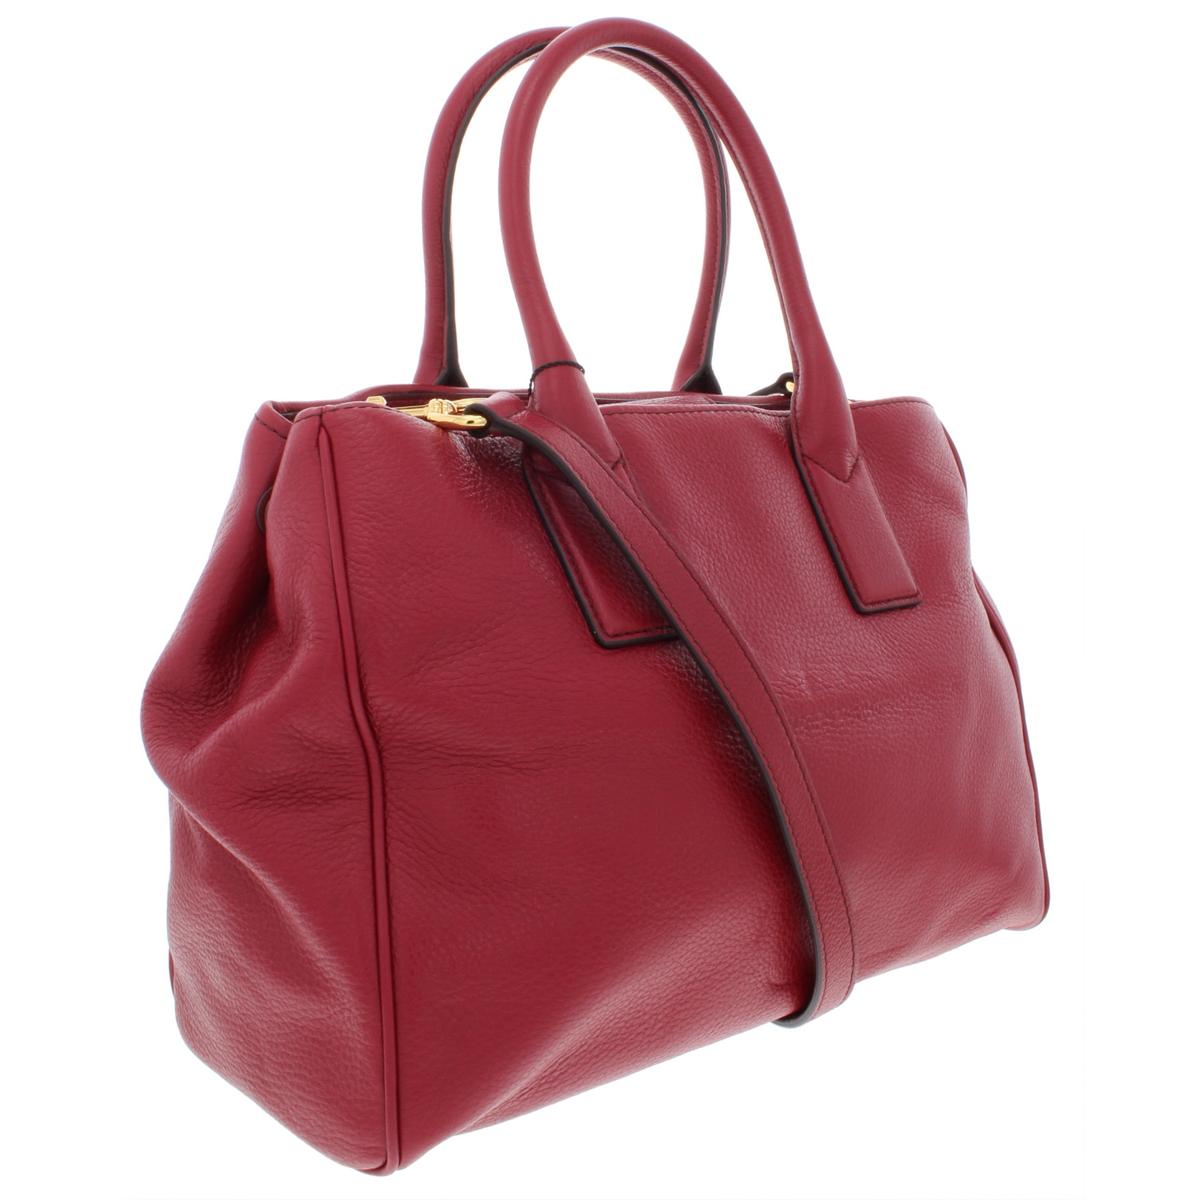 Marc Jacobs Womens Red Leather Pebbled Tote Handbag Purse Large BHFO ...